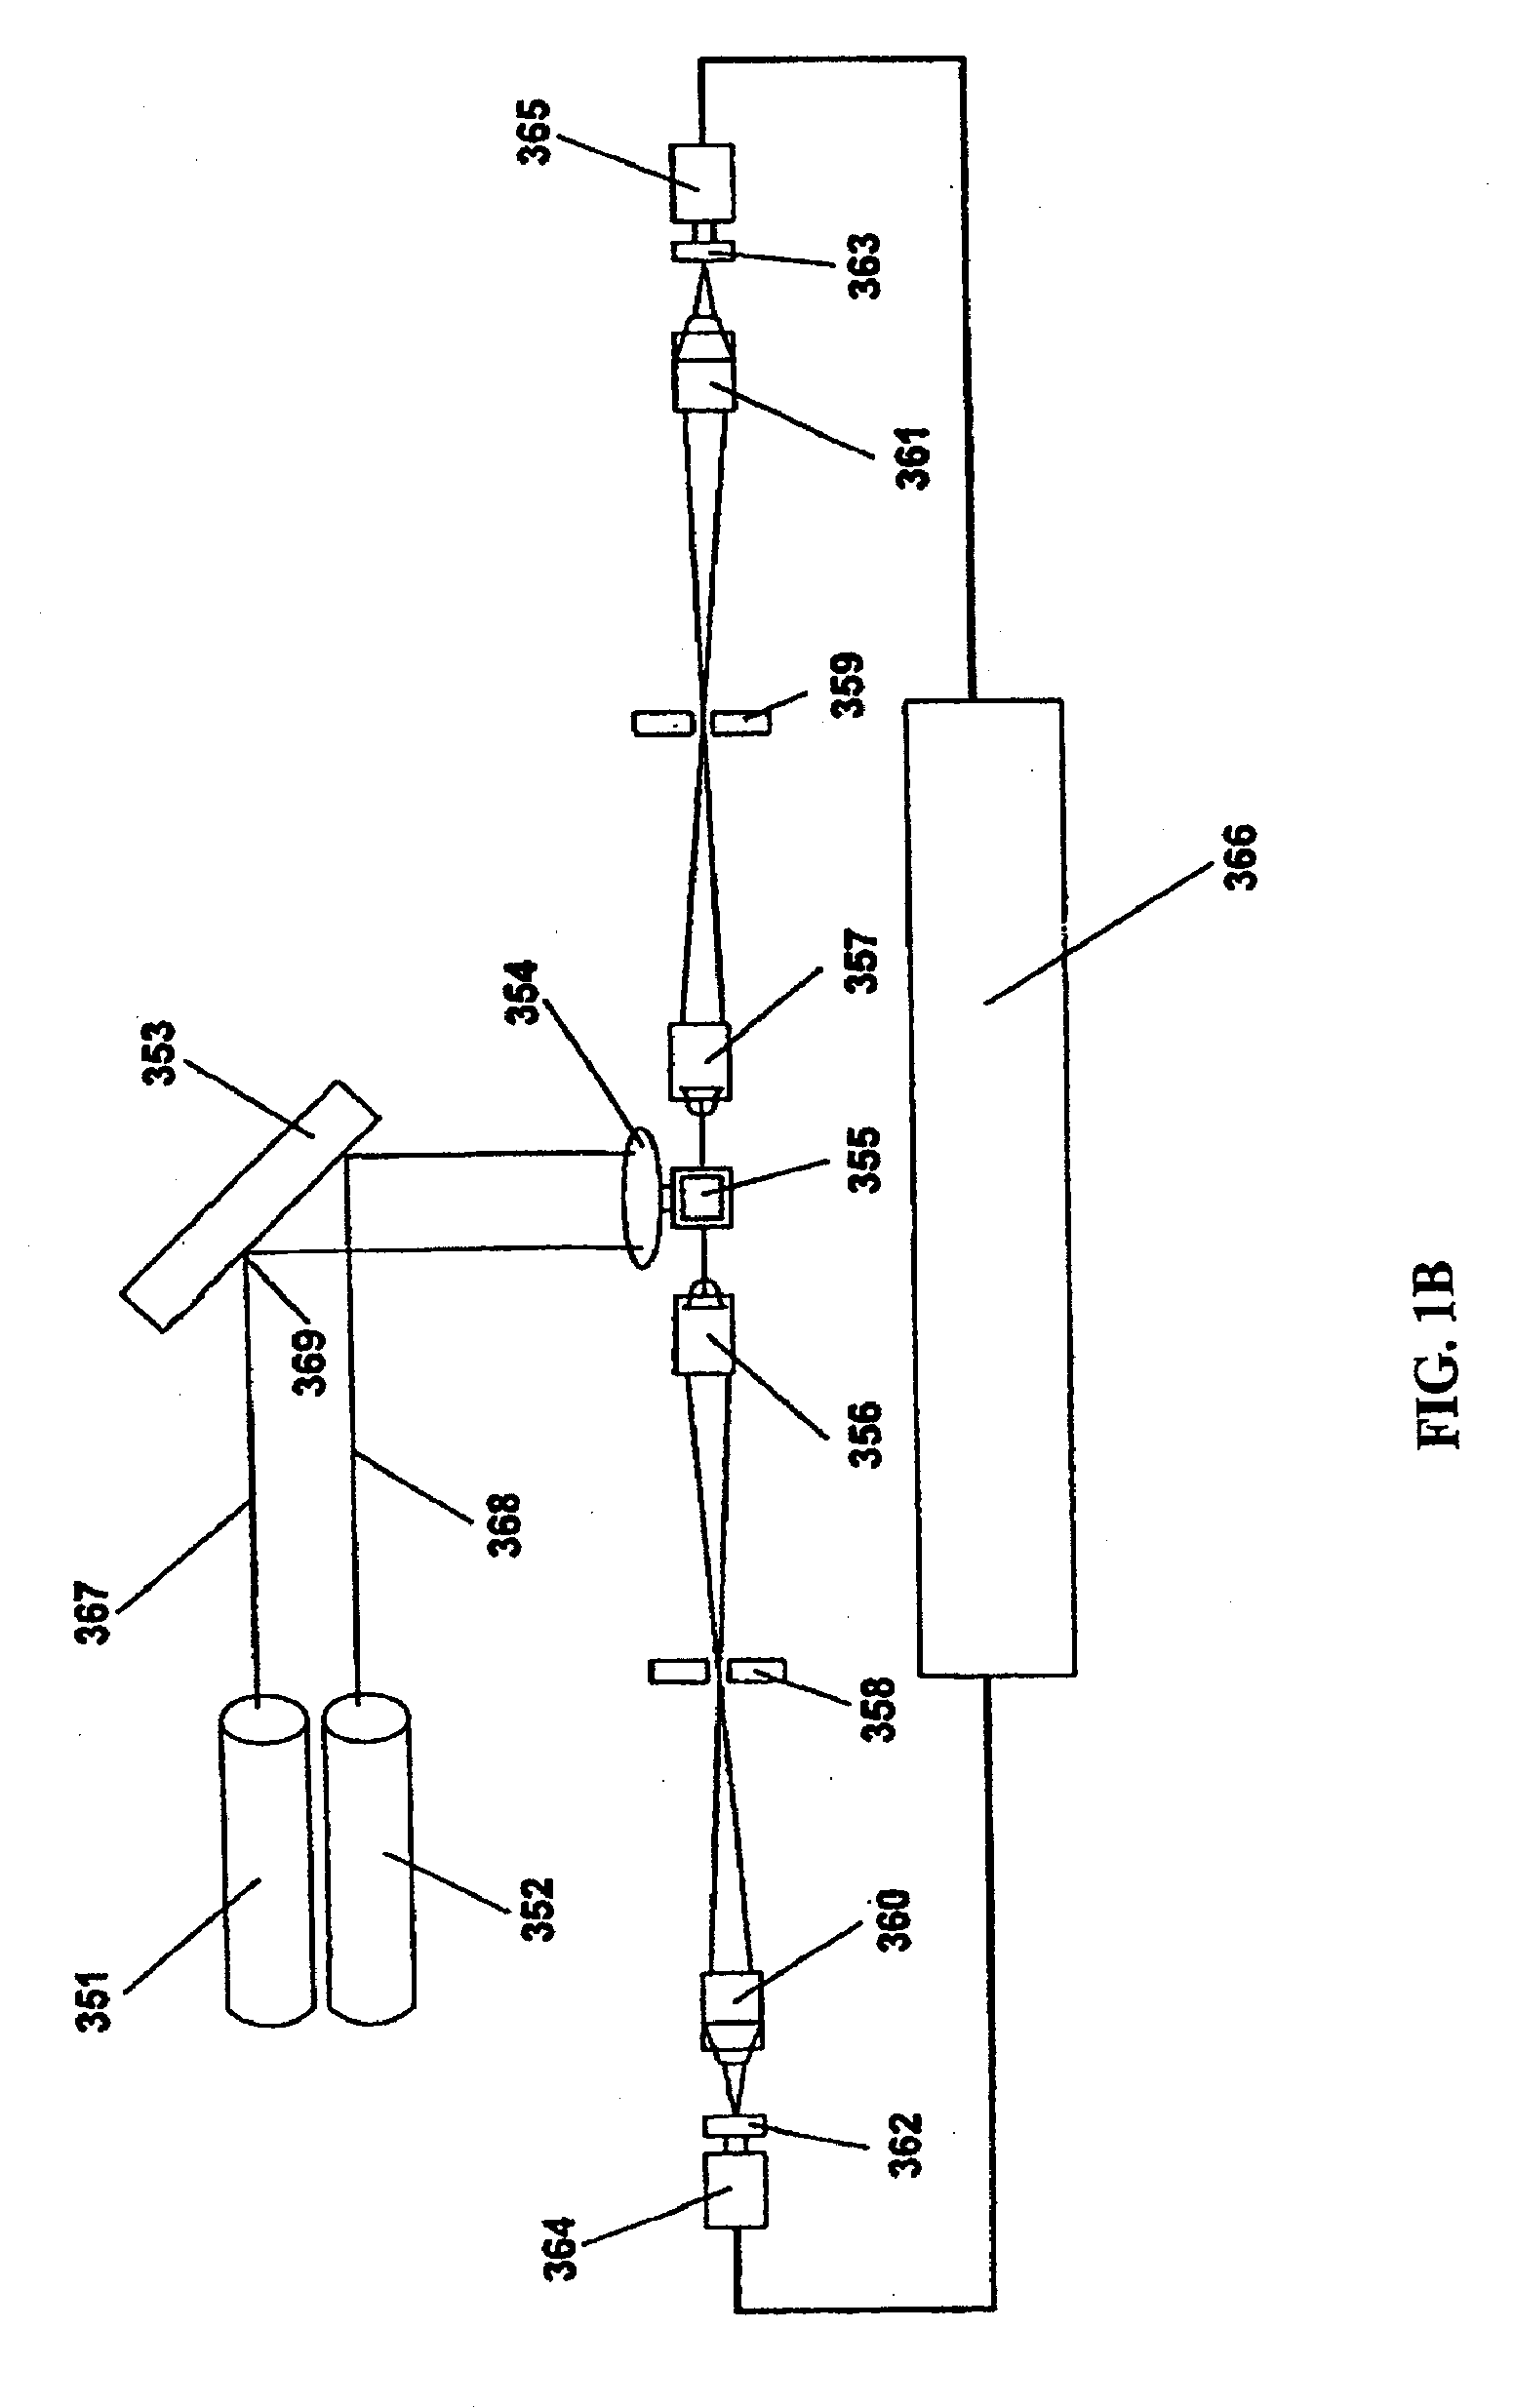 Highly Sensitive System and Methods for Analysis of Troponin